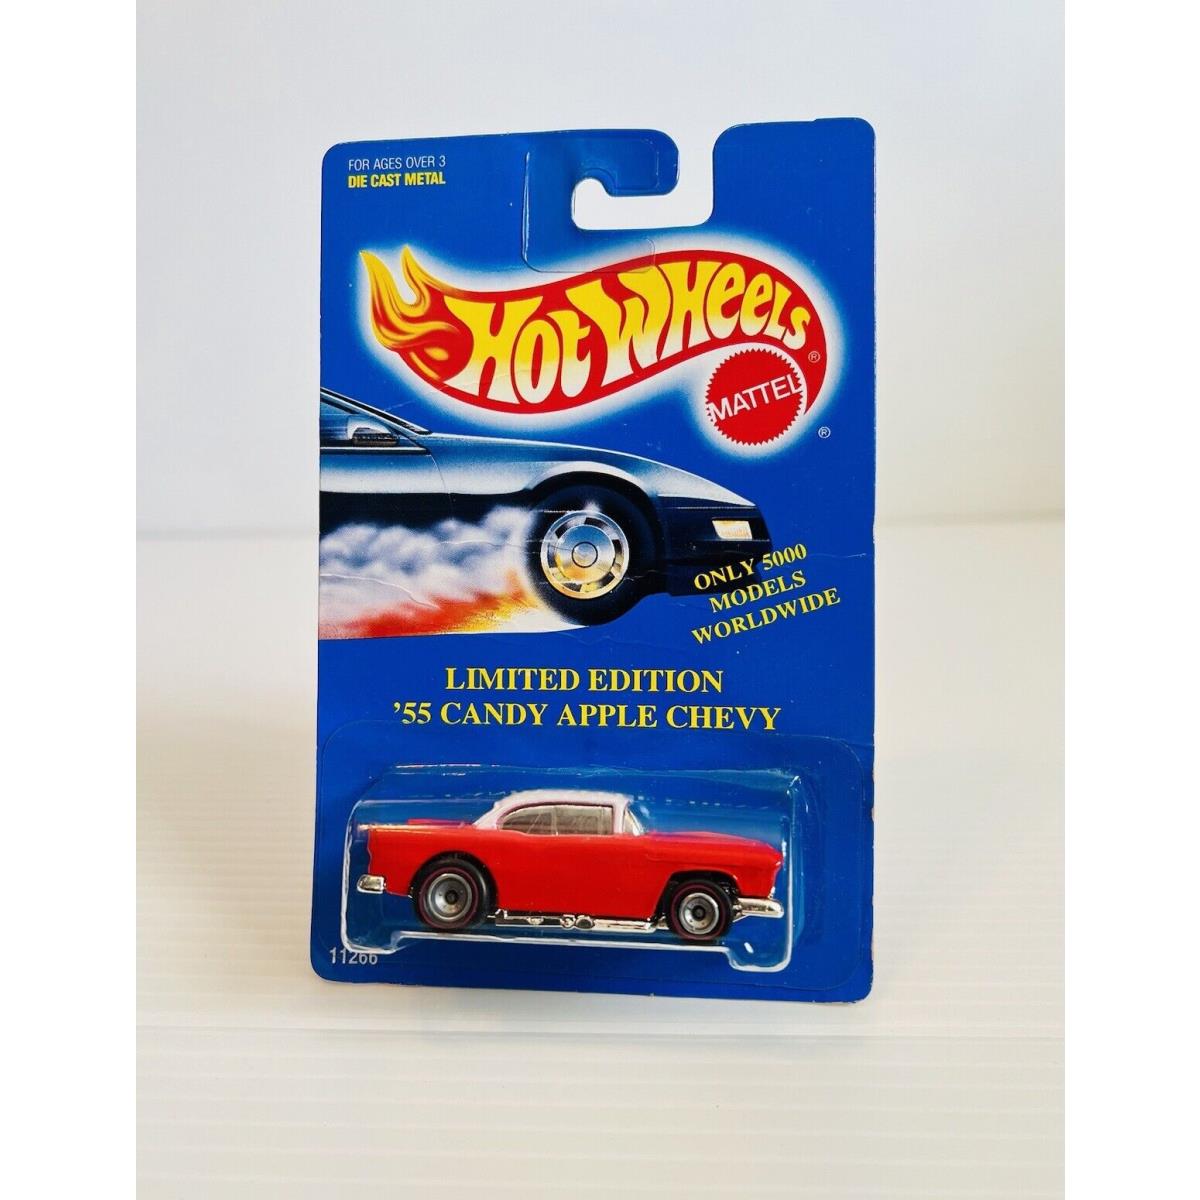 Hot Wheels Limited Edition `55 Candy Apple Chevy Only 5000 Models Worldwide - Red